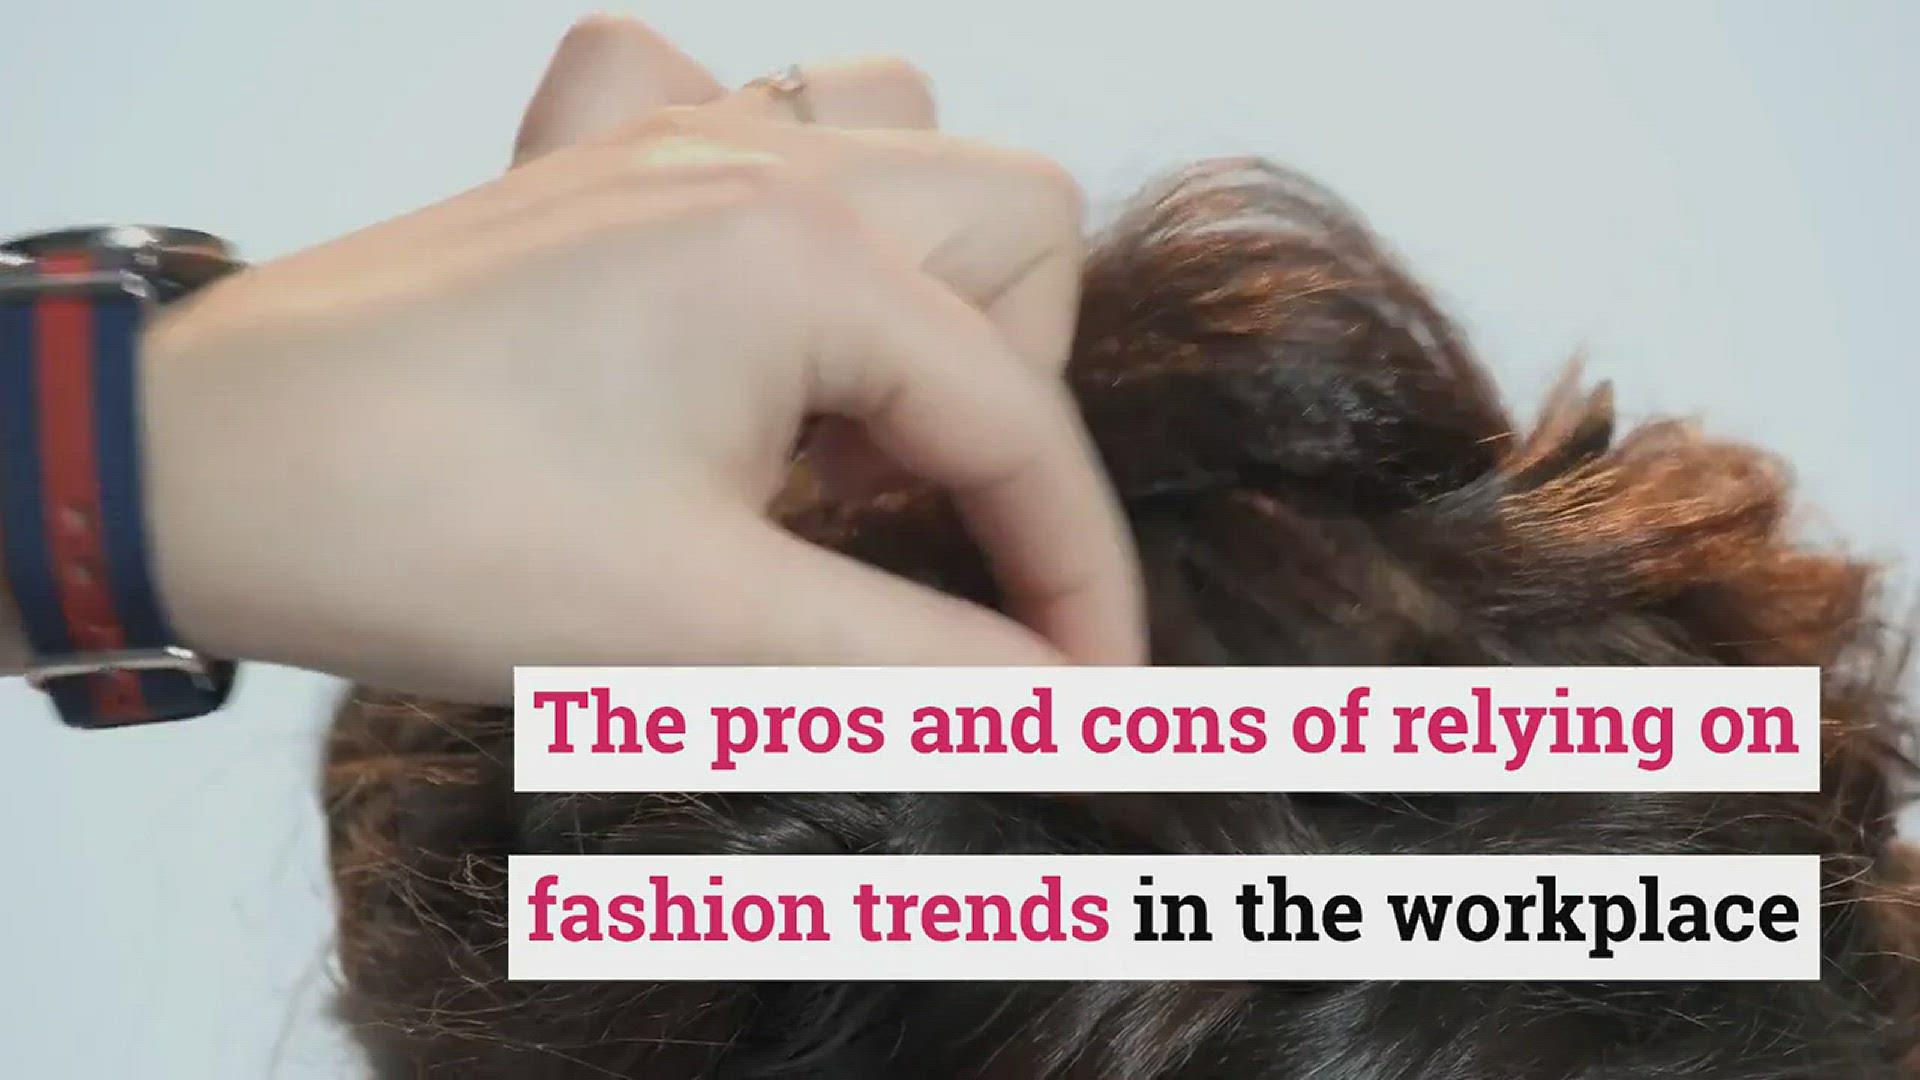 'Video thumbnail for The pros and cons of relying on fashion trends in the workplace'